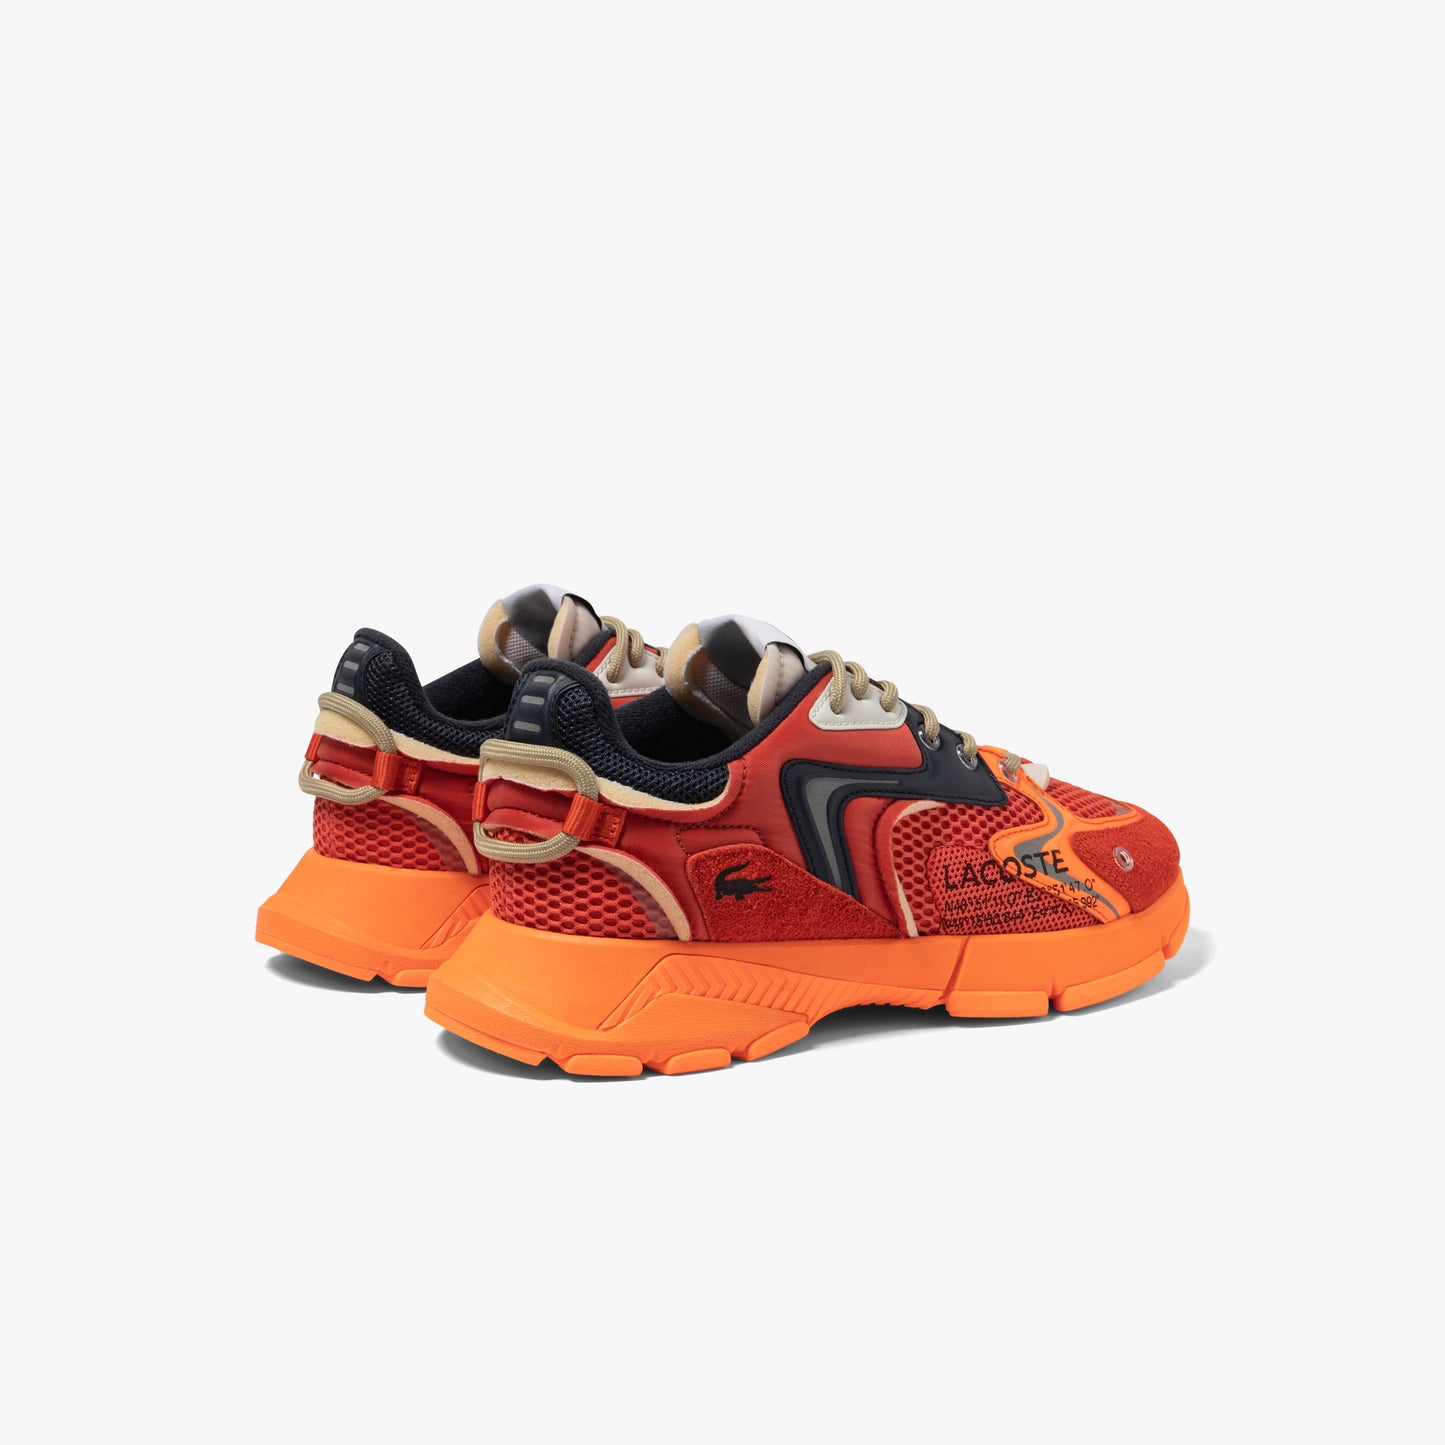 Lacoste - L003 Neo Textile Sneakers - Red/Orange – Todays Man Store